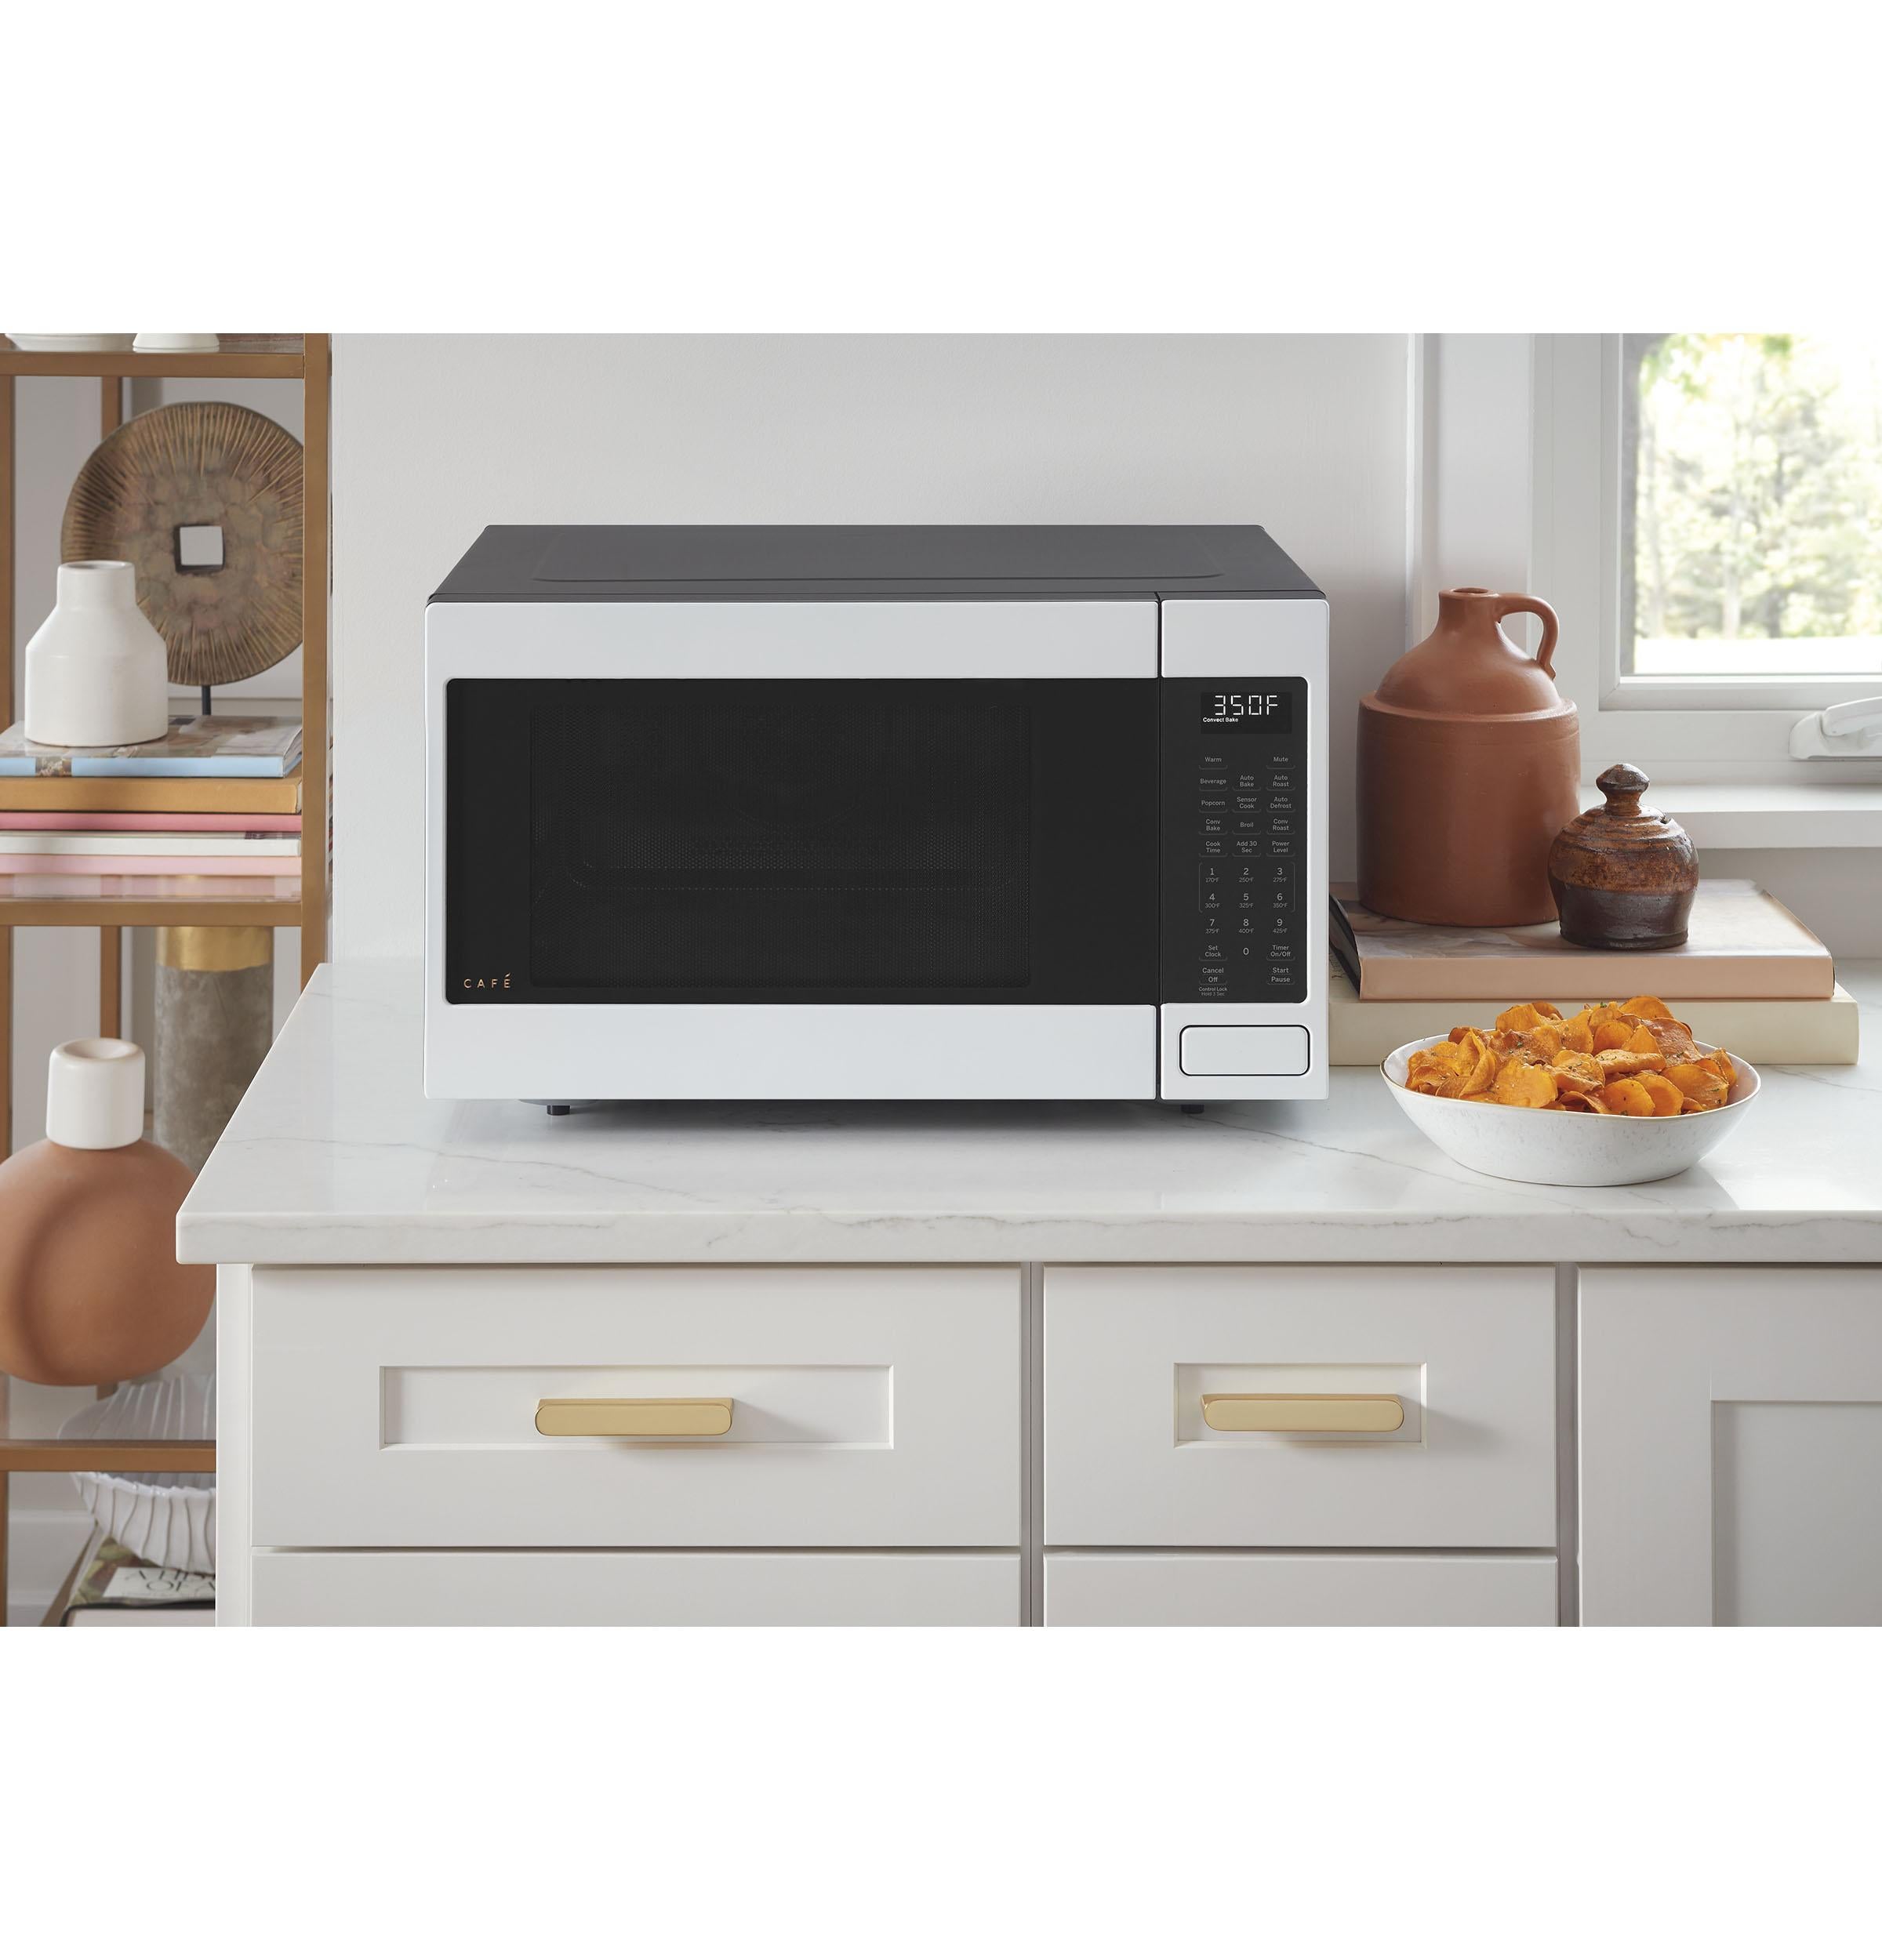 A Microwave That's As Versatile As You Are